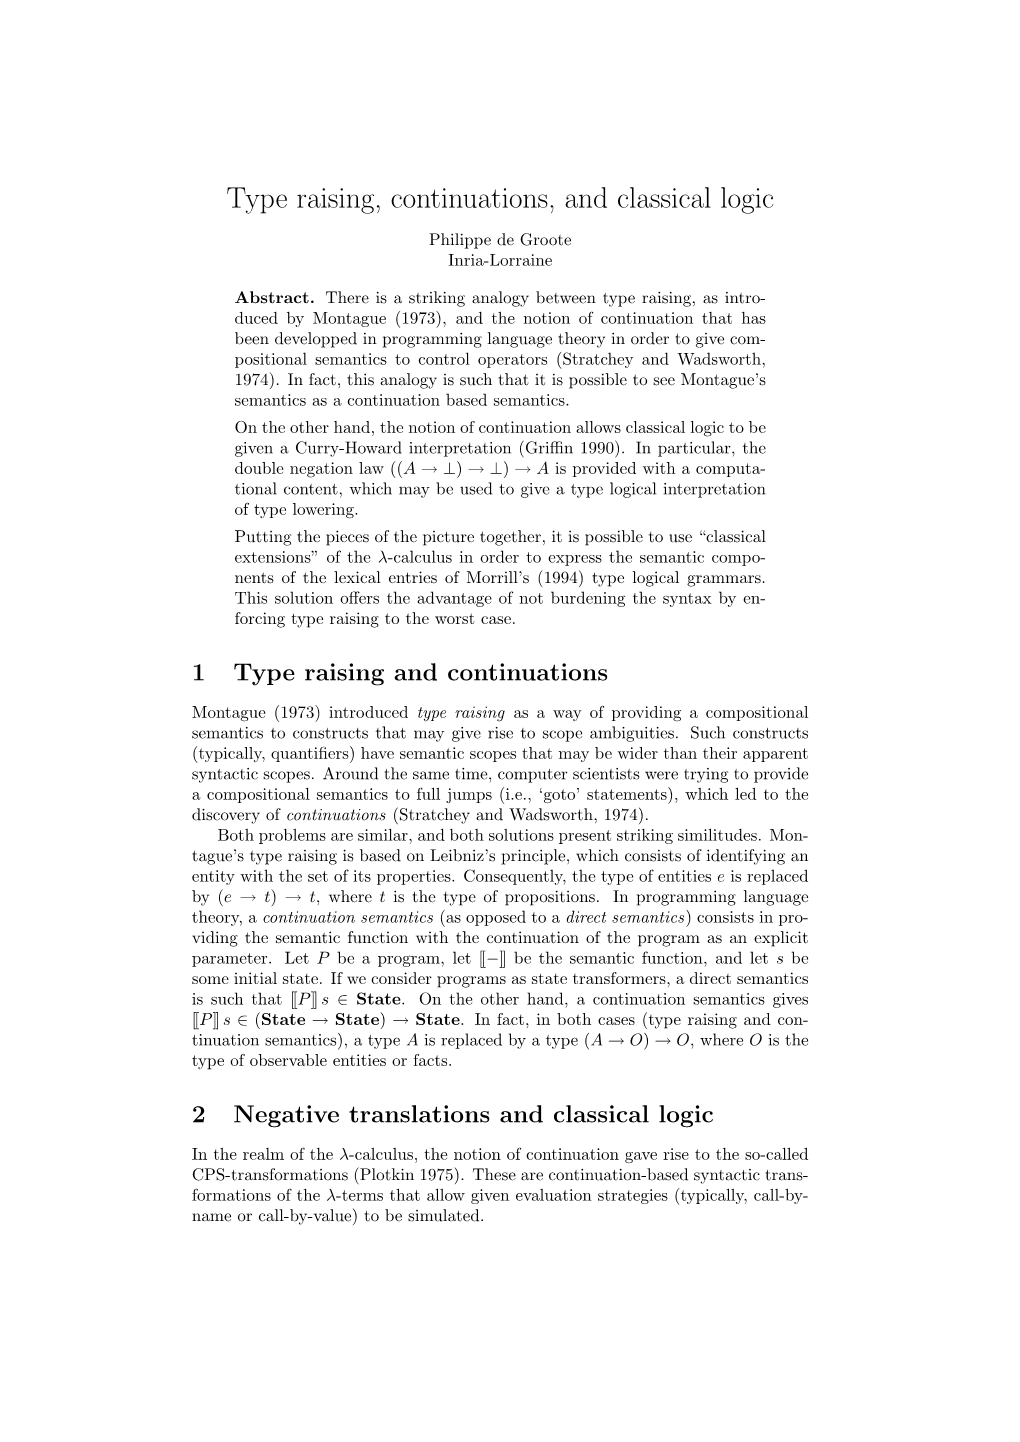 Type Raising, Continuations, and Classical Logic